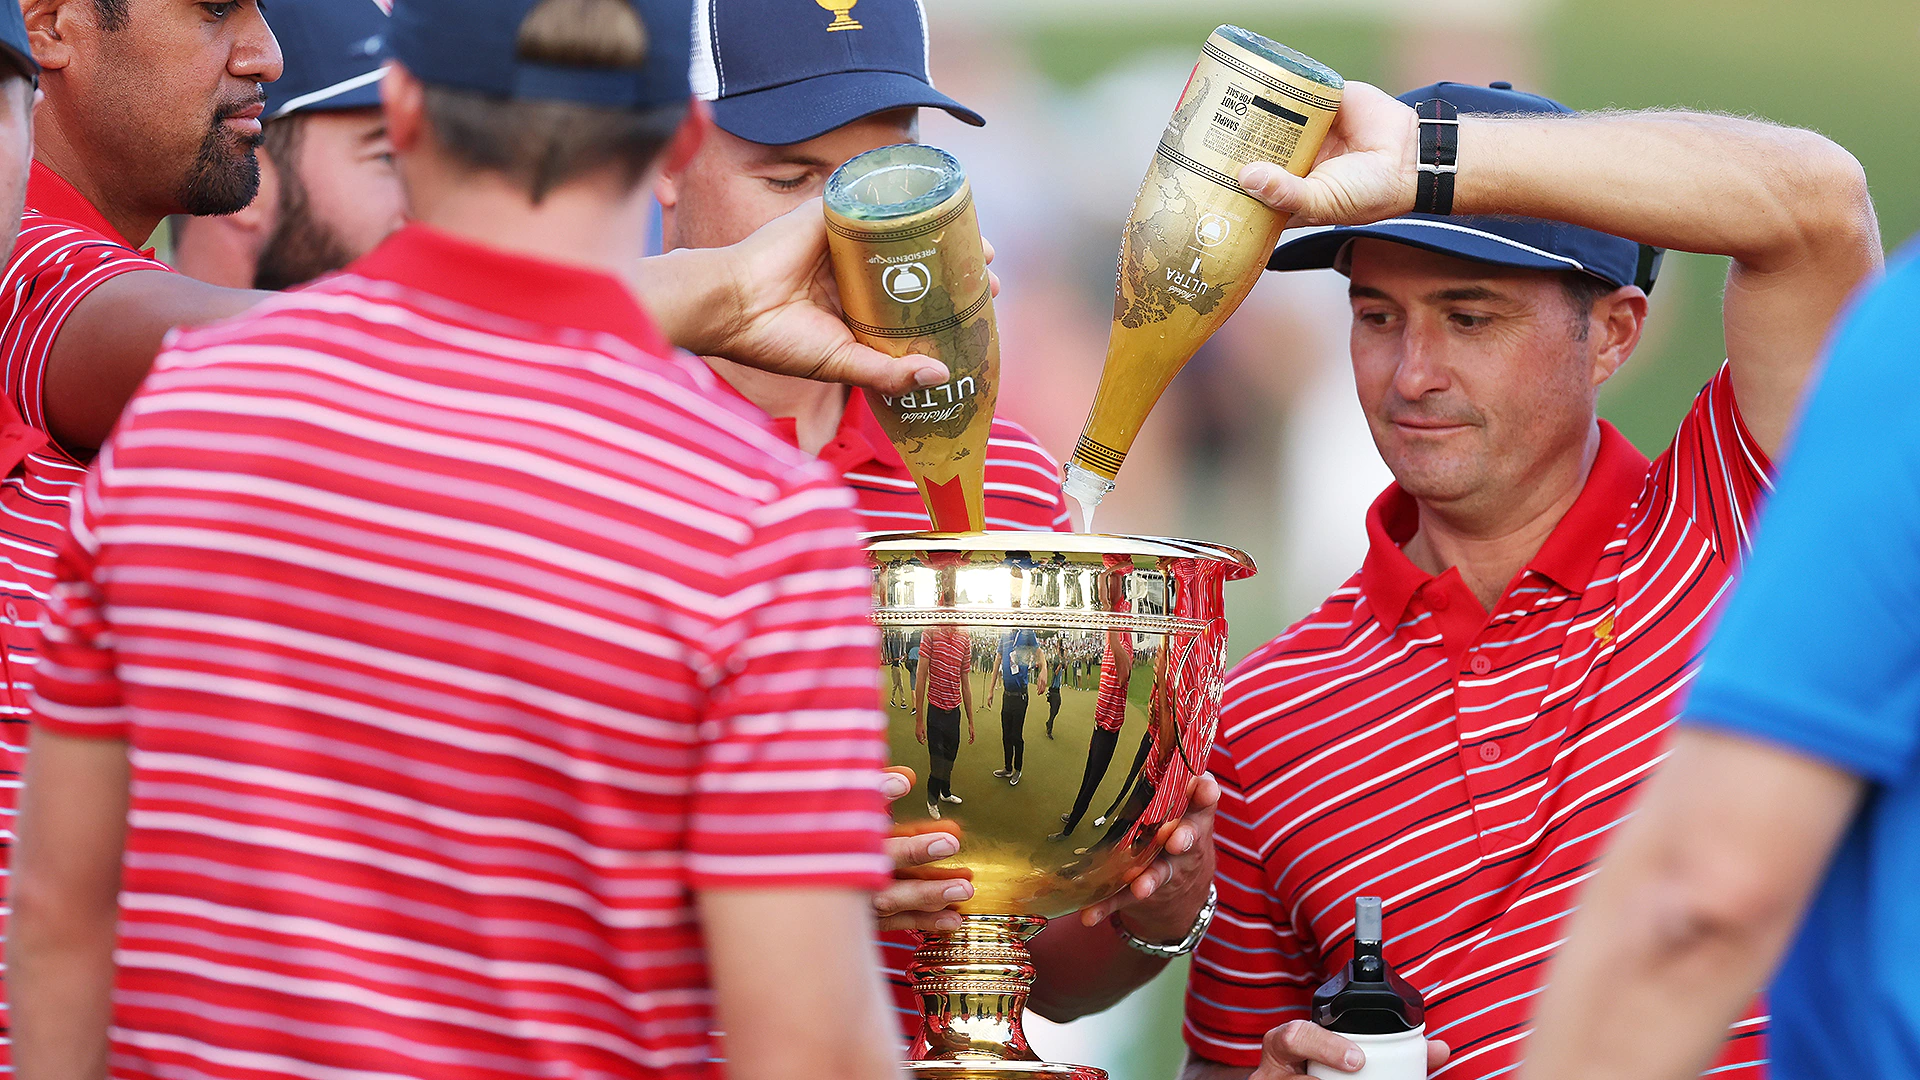 2022 Presidents Cup: Kevin Kisner, the ‘best partier’ on U.S. team, happy to show off skills following win